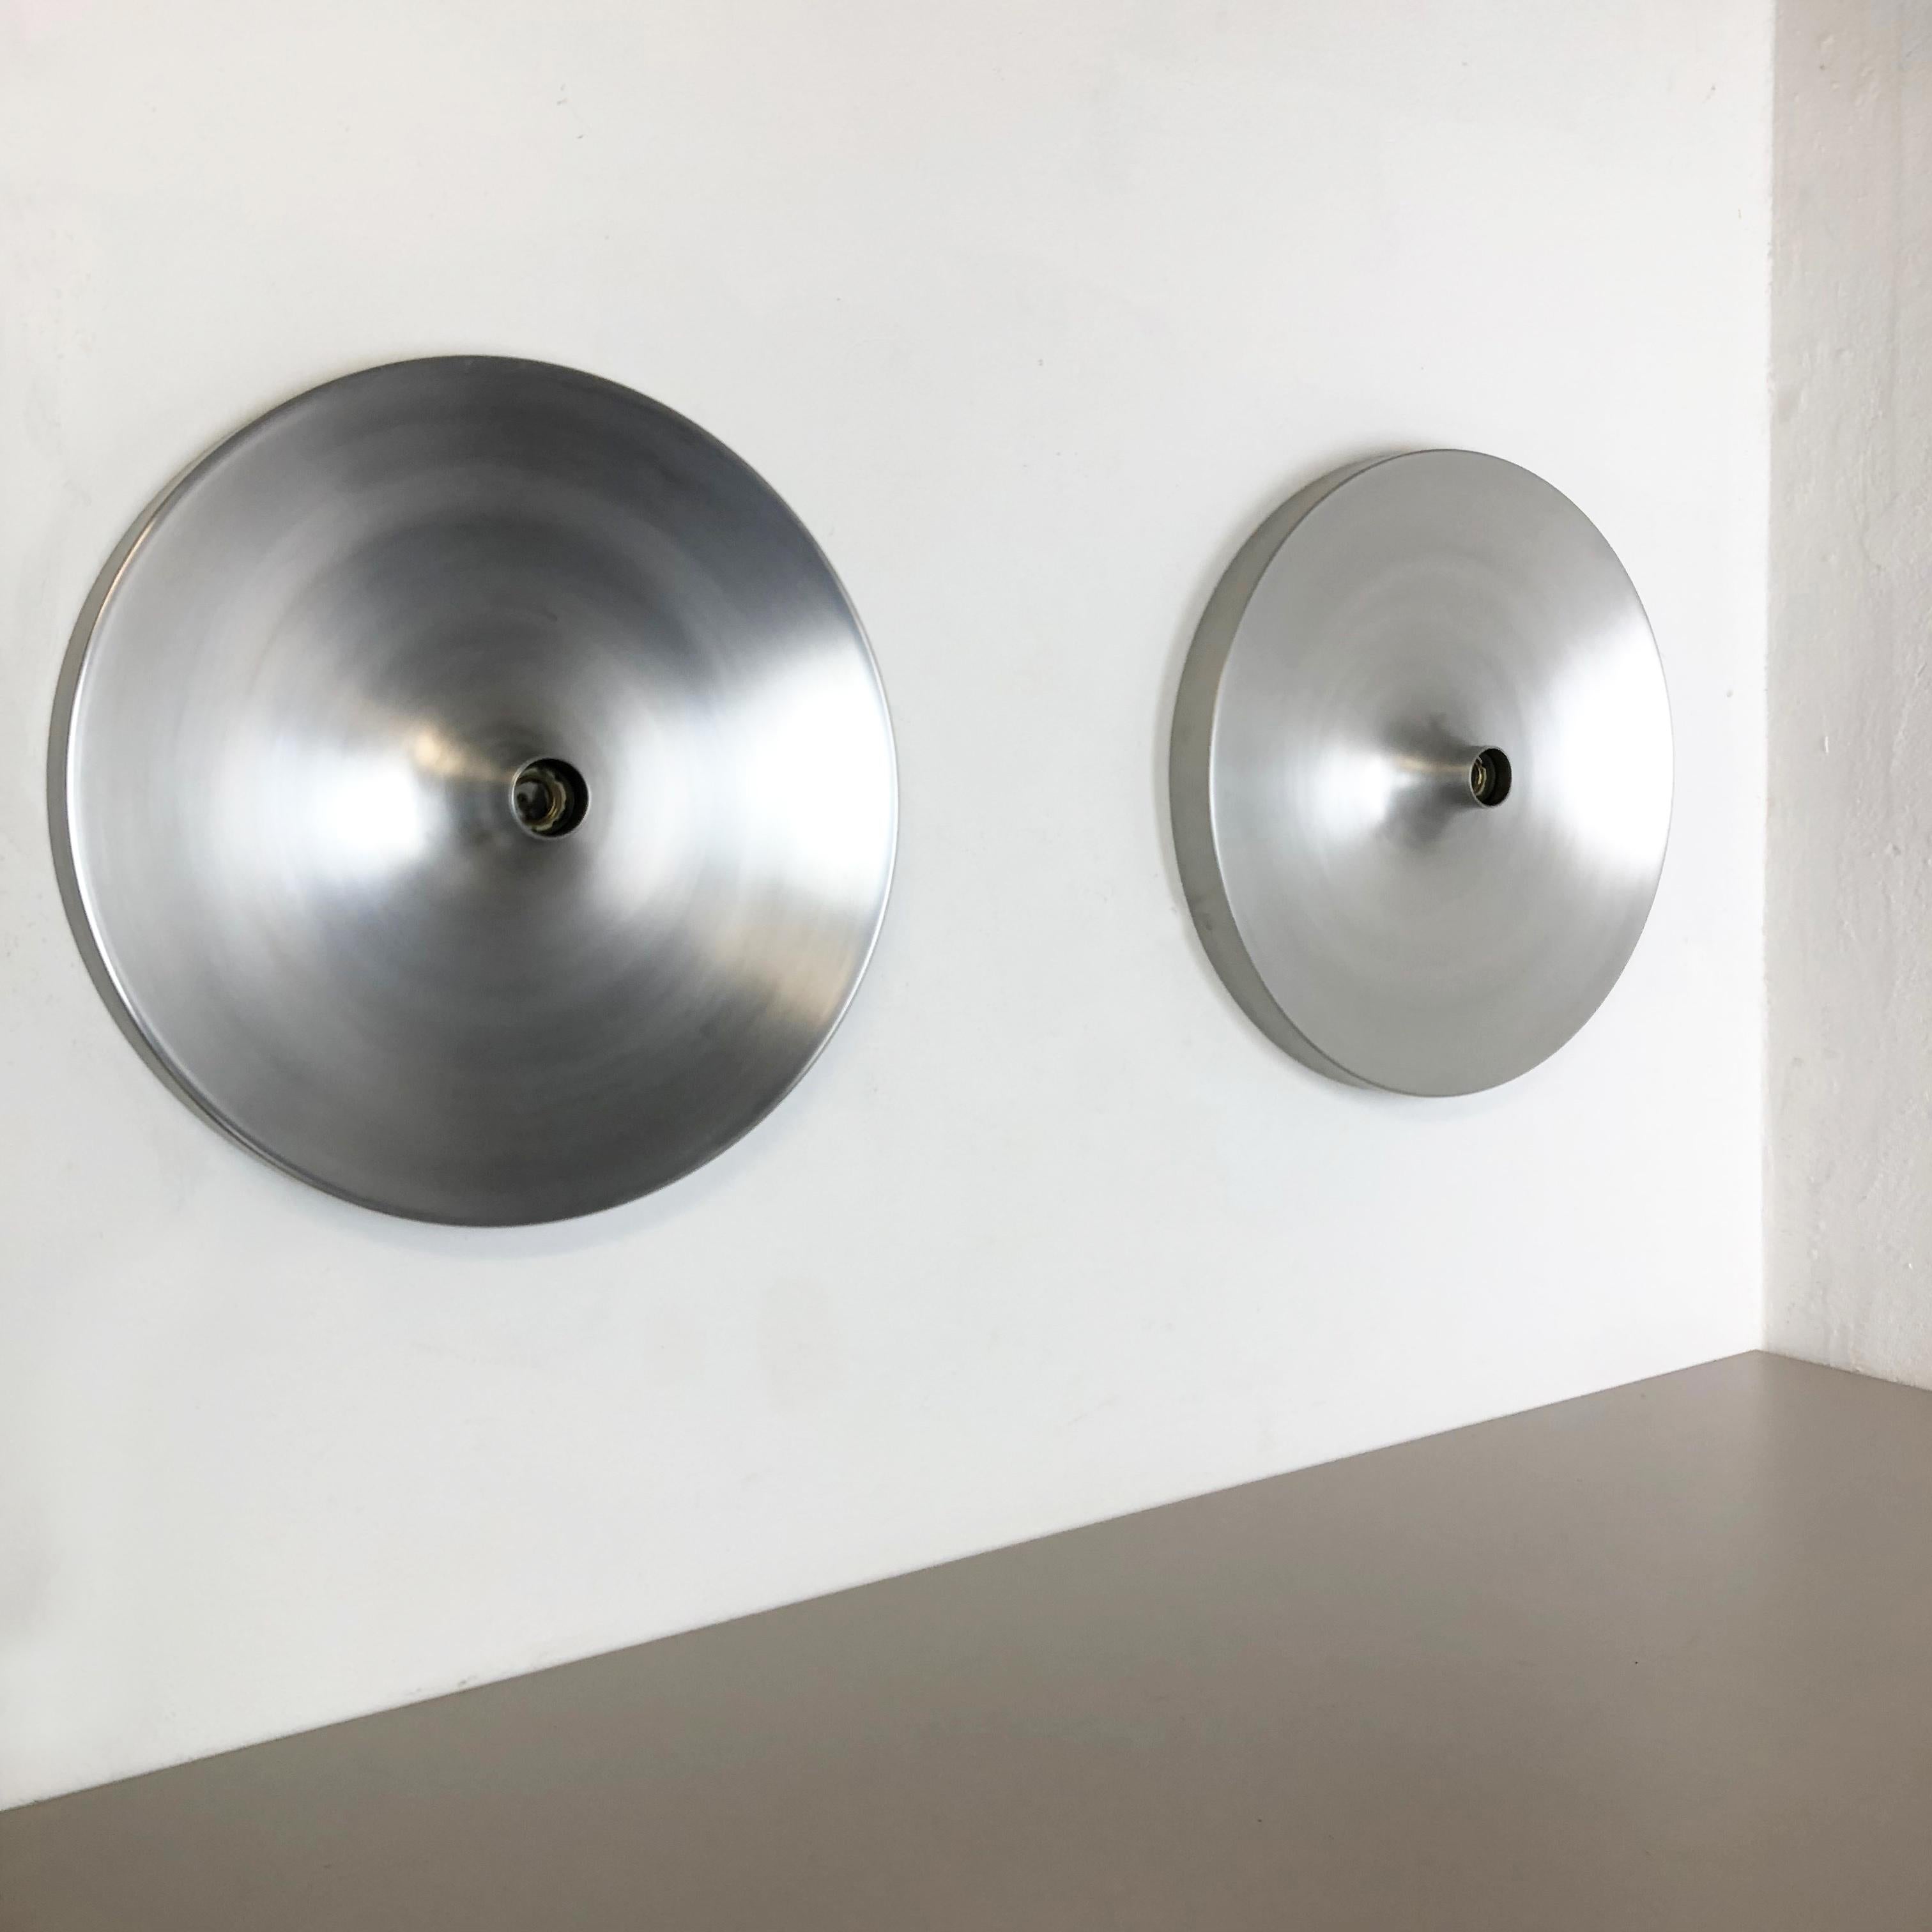 Article:

Extra large wall light sconce set of two


Producer:

Staff Lights



Origin:

Germany



Age:

1970s



Original 1960s modernist German wall light made of solid metal with polished surface. This super rare wall